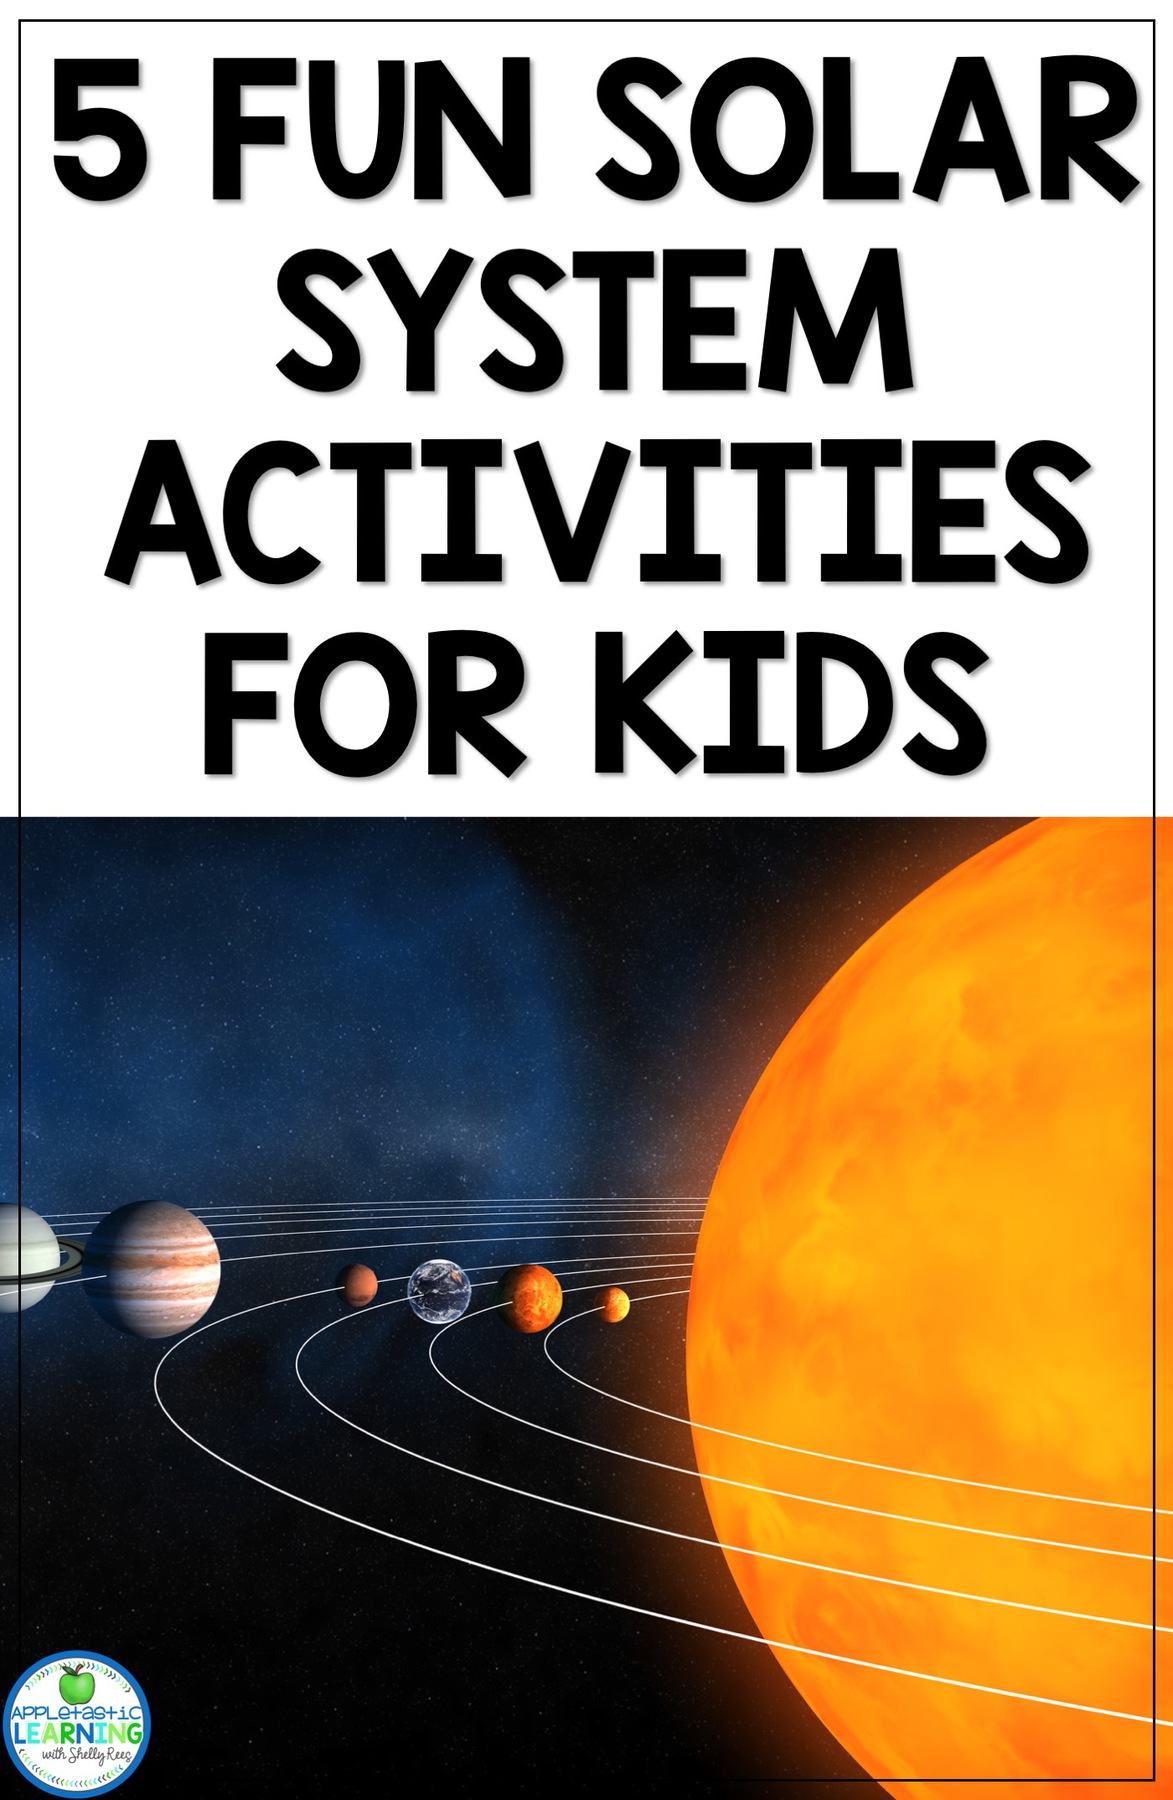 solar system planets projects for kids